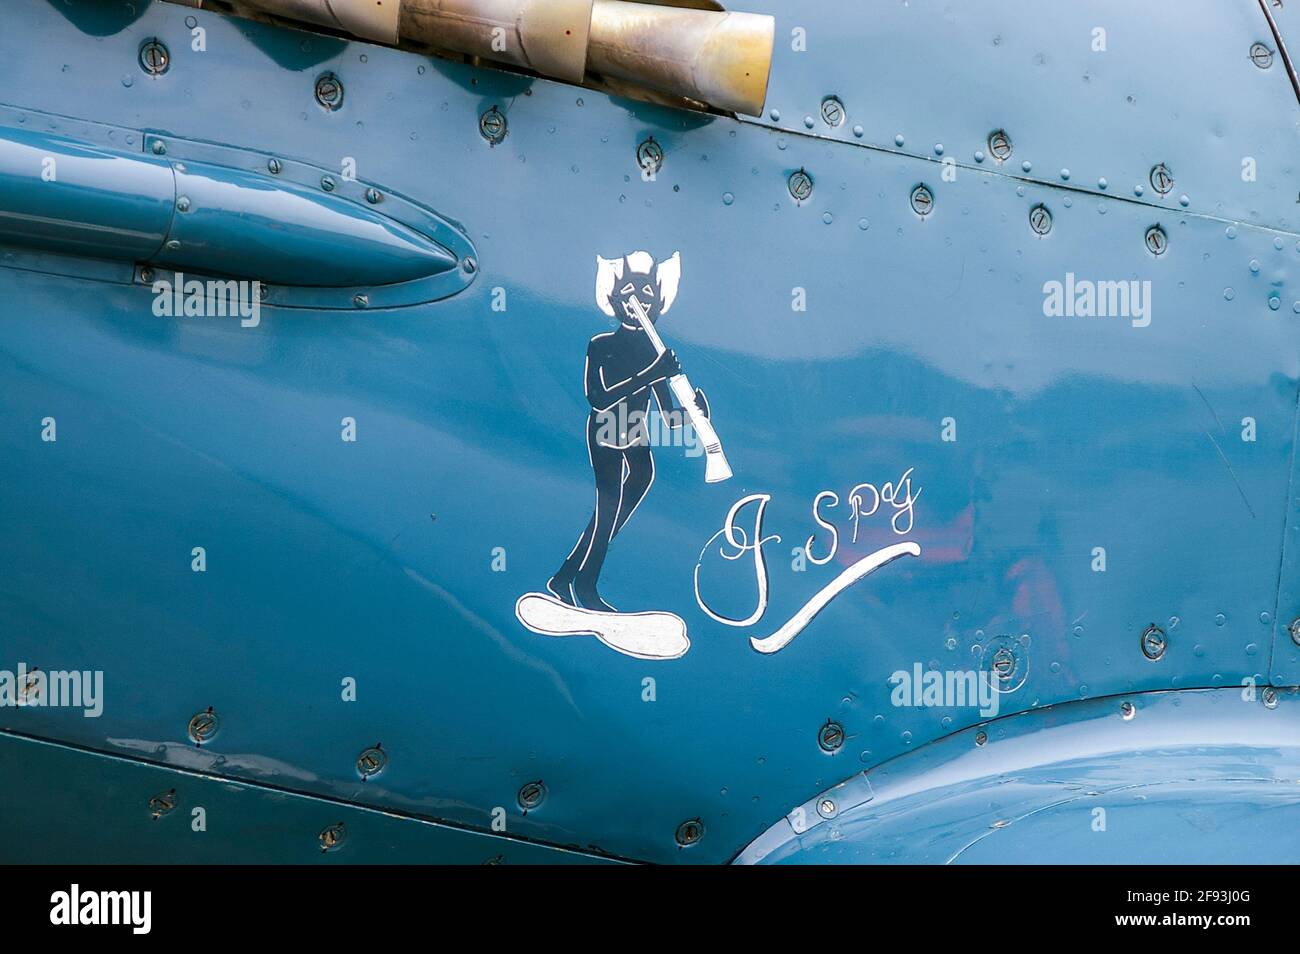 Rolls Royce owned and operated Supermarine Spitfire PRXIX serial PS853 with nose art of an imp and I Spy. Photo reconnaissance blue Spitfire Stock Photo